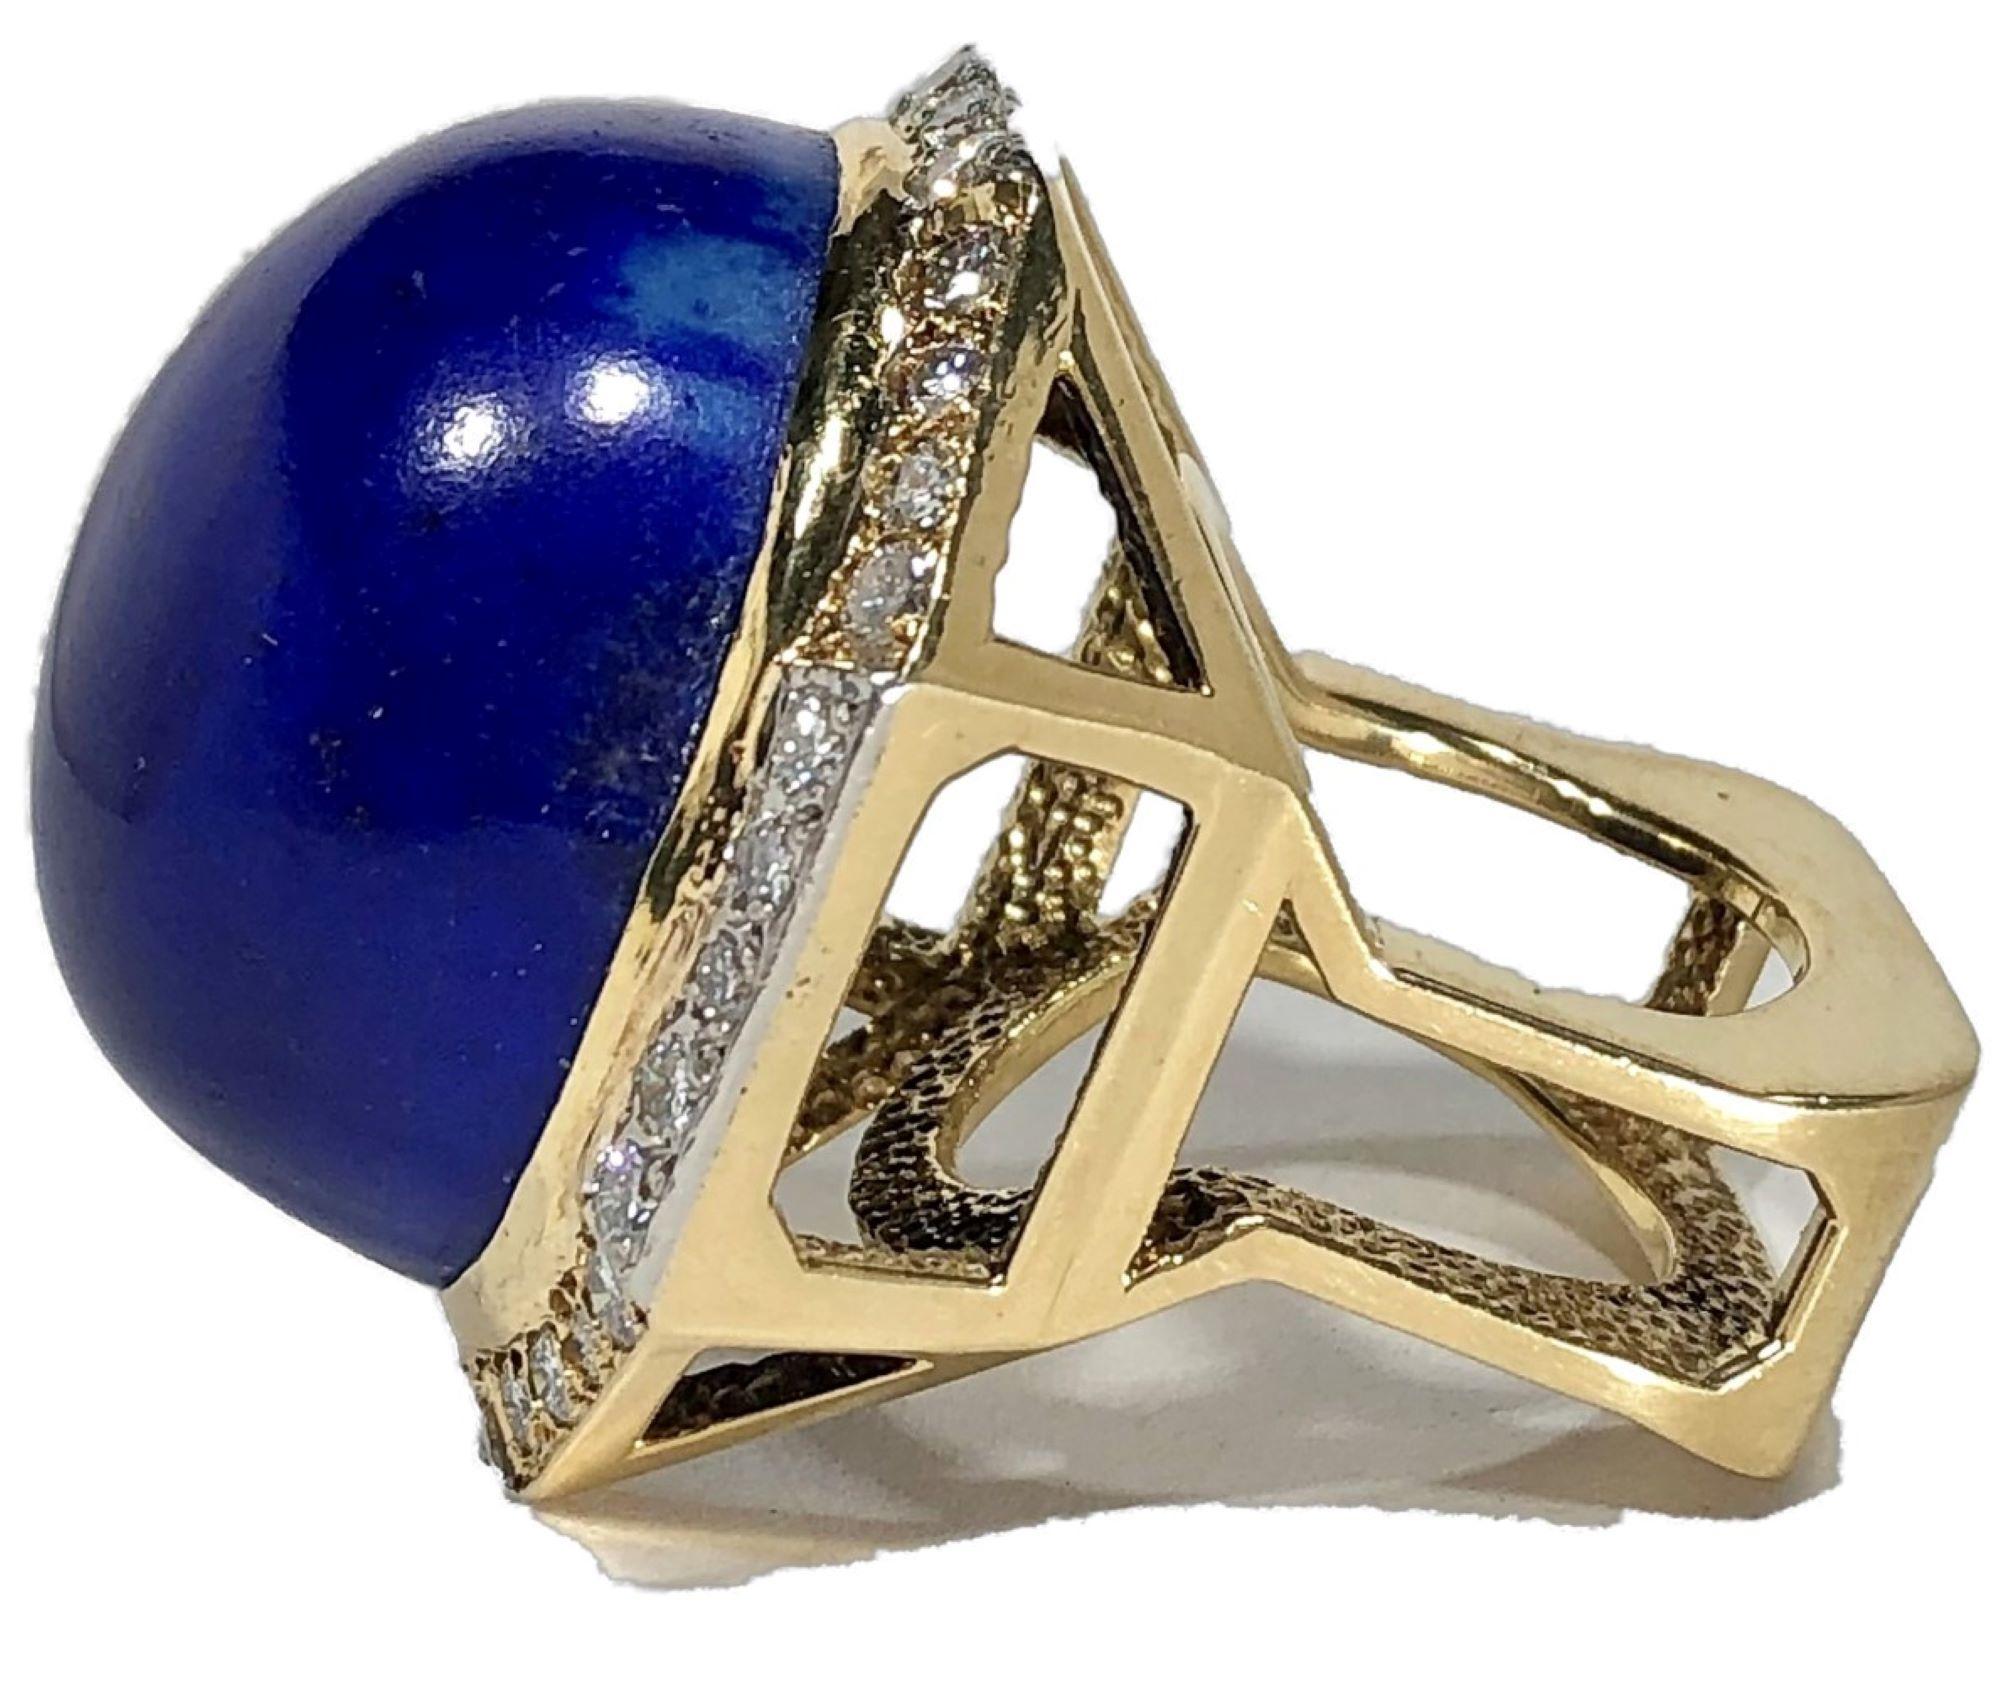 Massive Gold Cocktail Ring with 86 Carat Lapis-Lazuli Cabochon and Diamonds 2